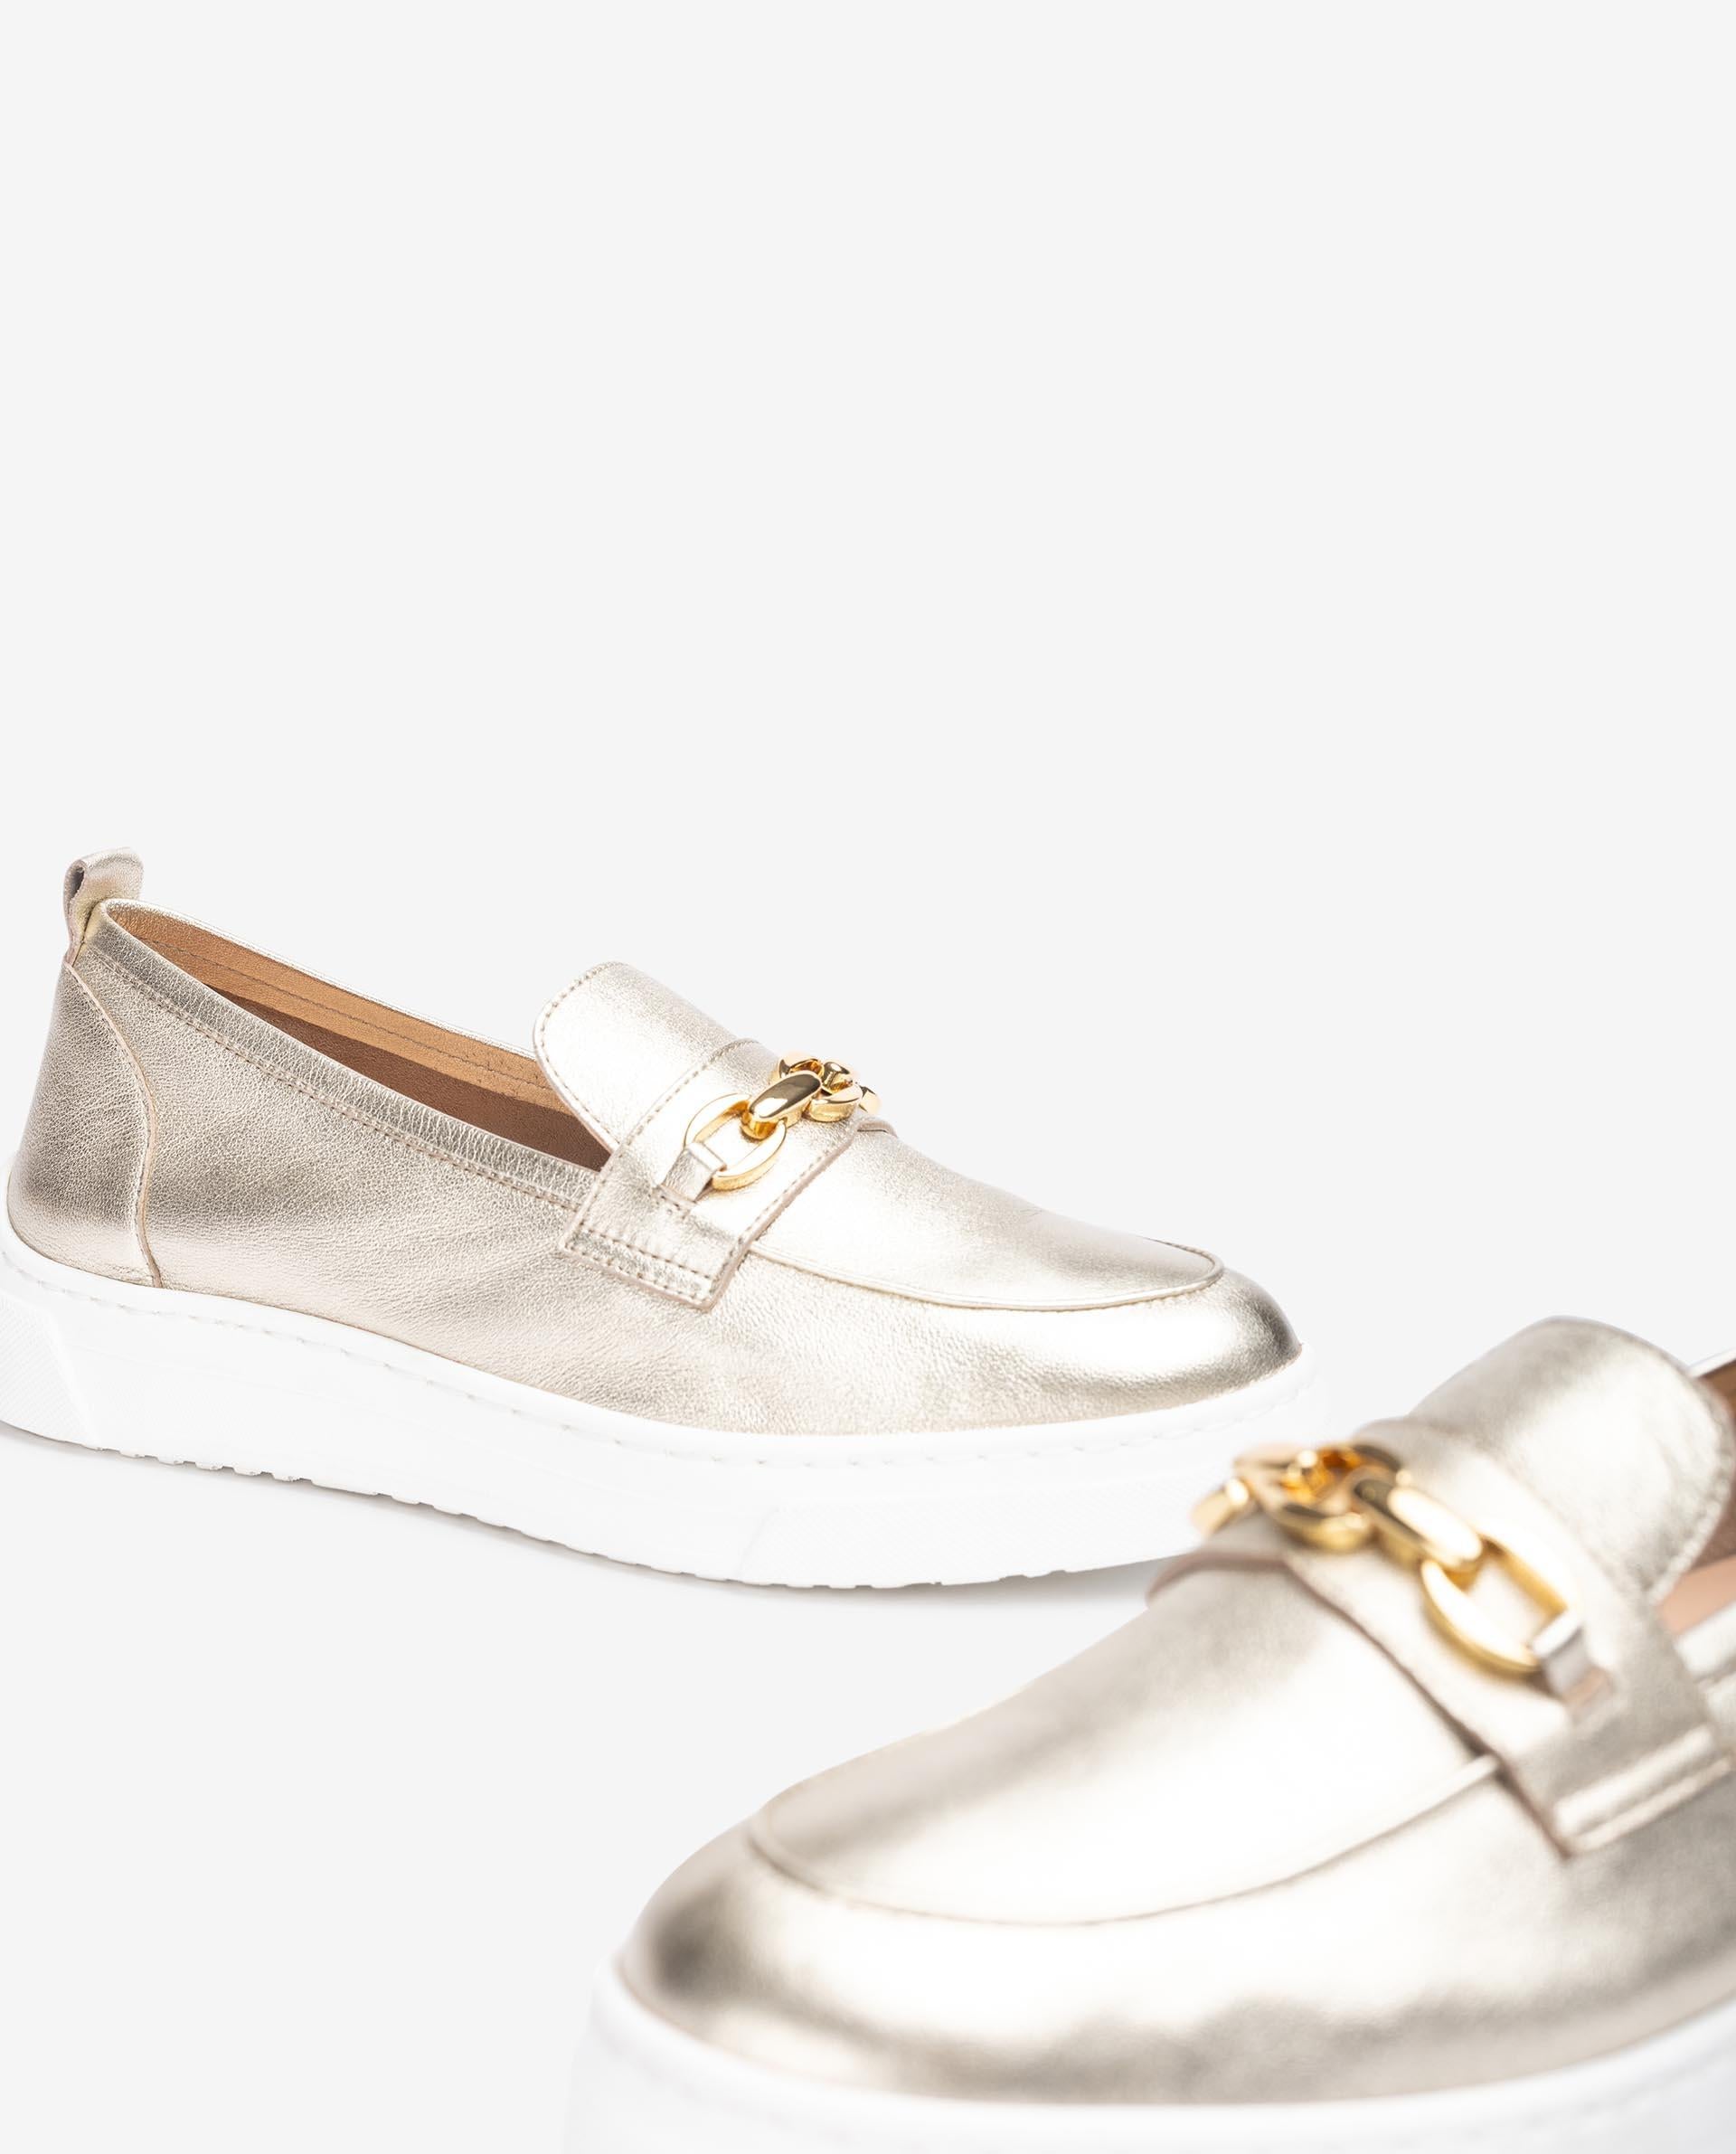 Top view of the rounded toe and metallic gold upper of the Unisa FINDAY Loafer.